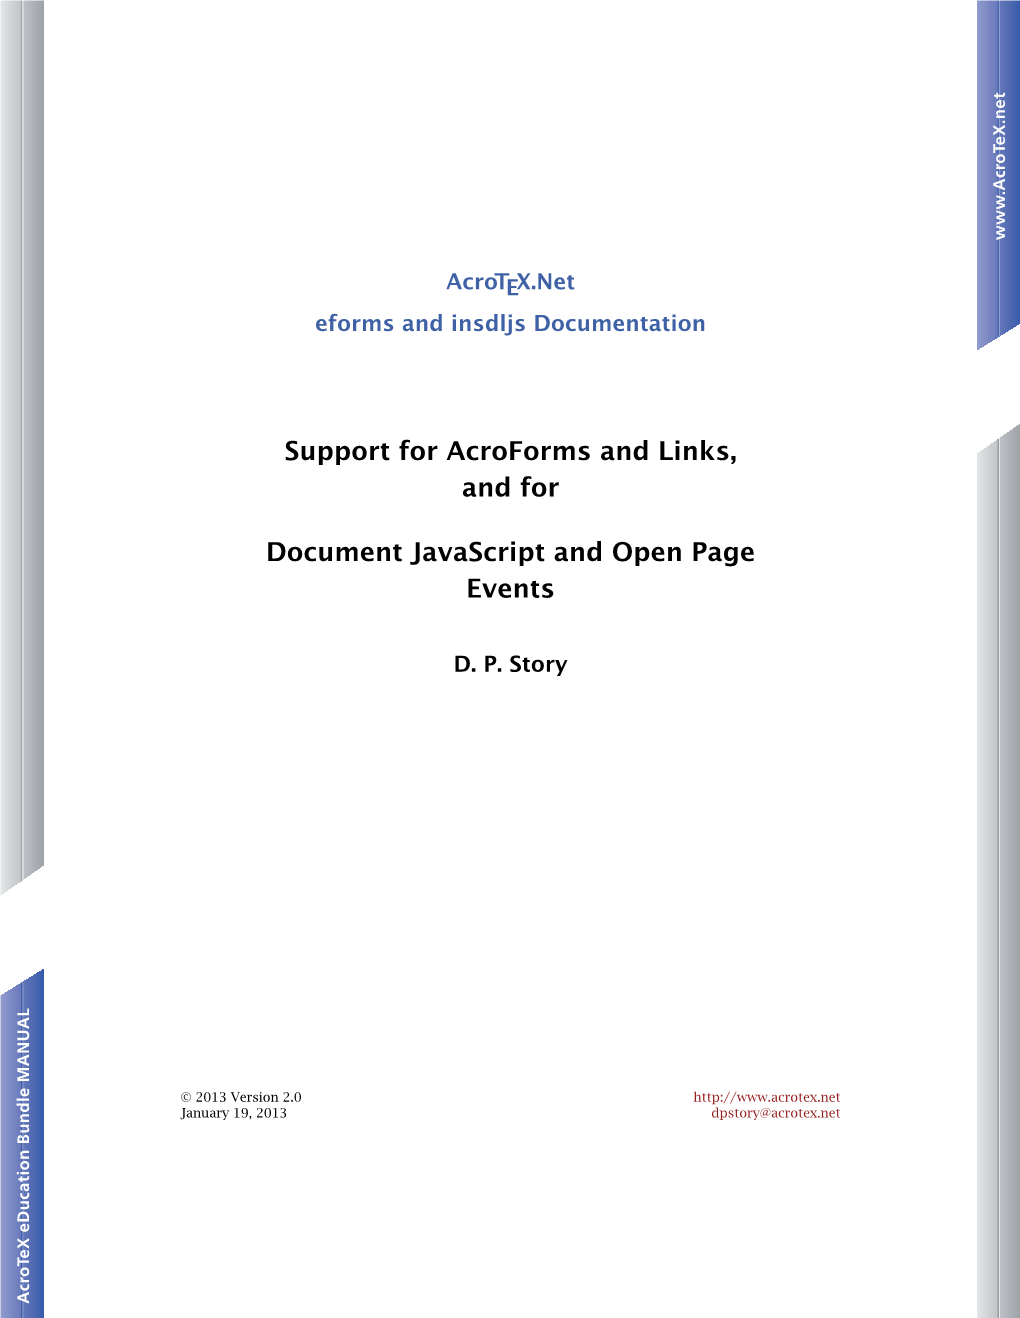 Support for Acroforms and Links, and for Document Javascript and Open